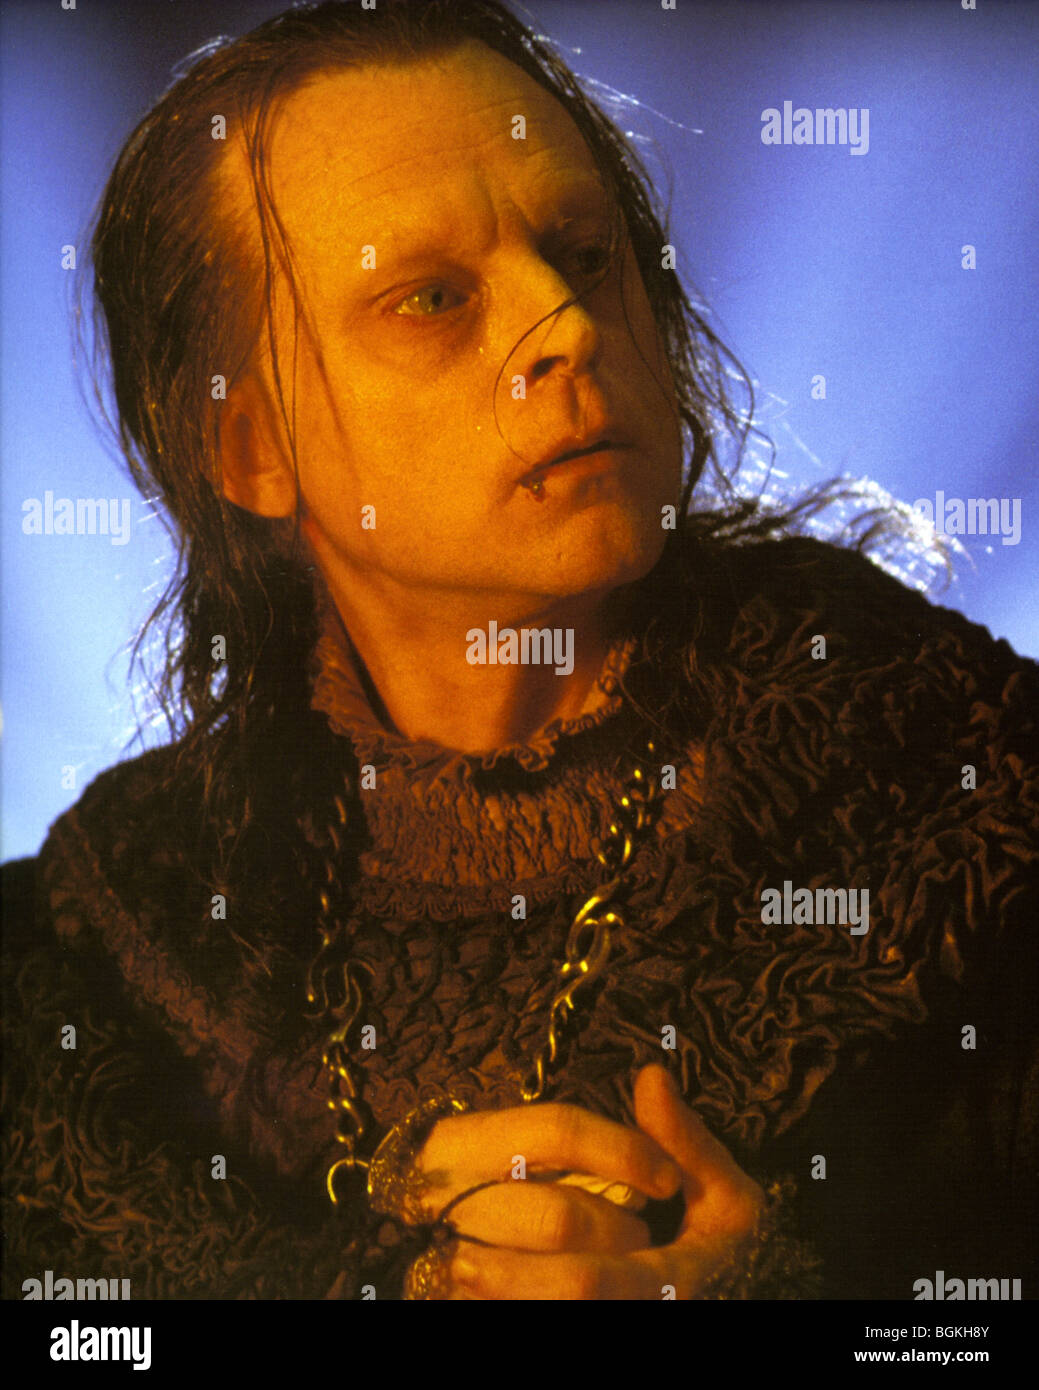 Grima LOTR Brad Dourif | Lord of the rings, Best actor, Actors